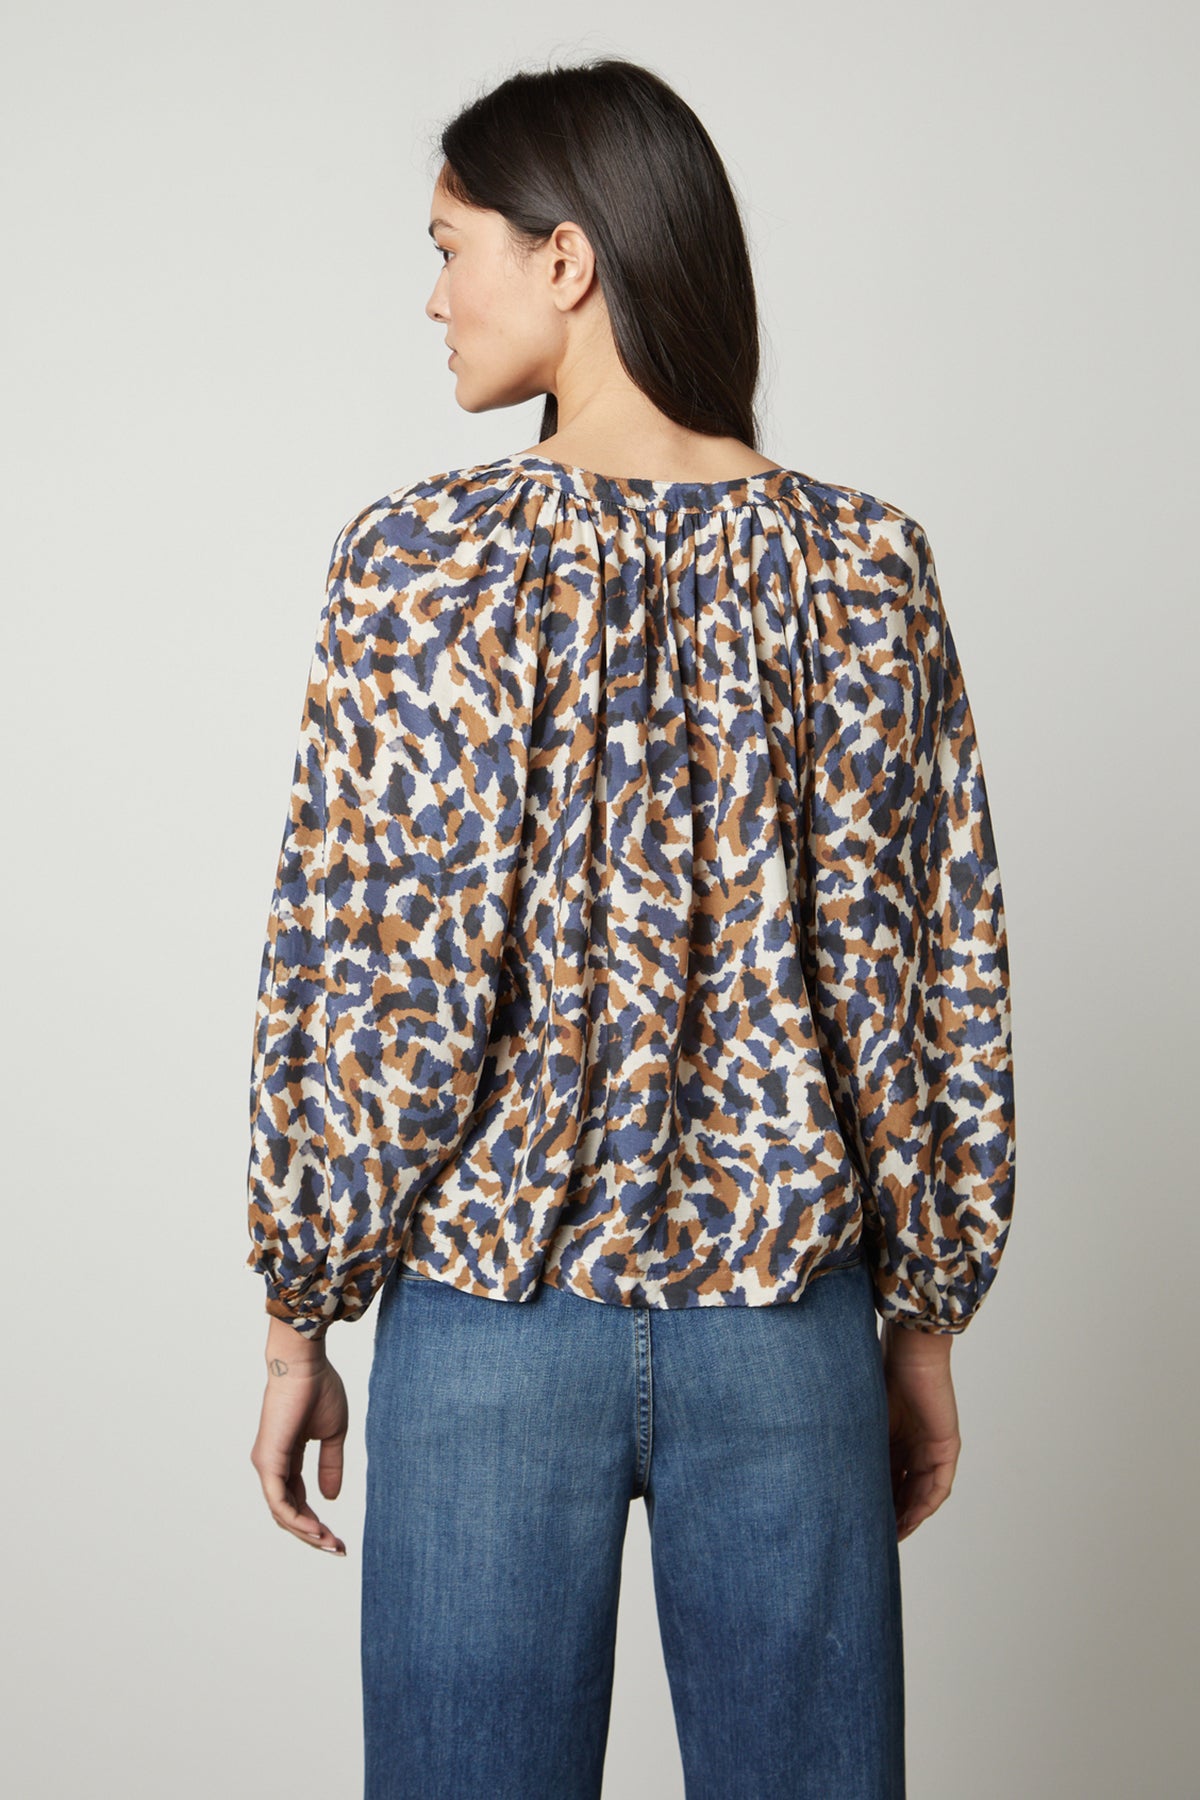 The view of a woman wearing the Velvet by Graham & Spencer MELINDA PRINTED BUTTON-UP TOP blouse.-26895474589889